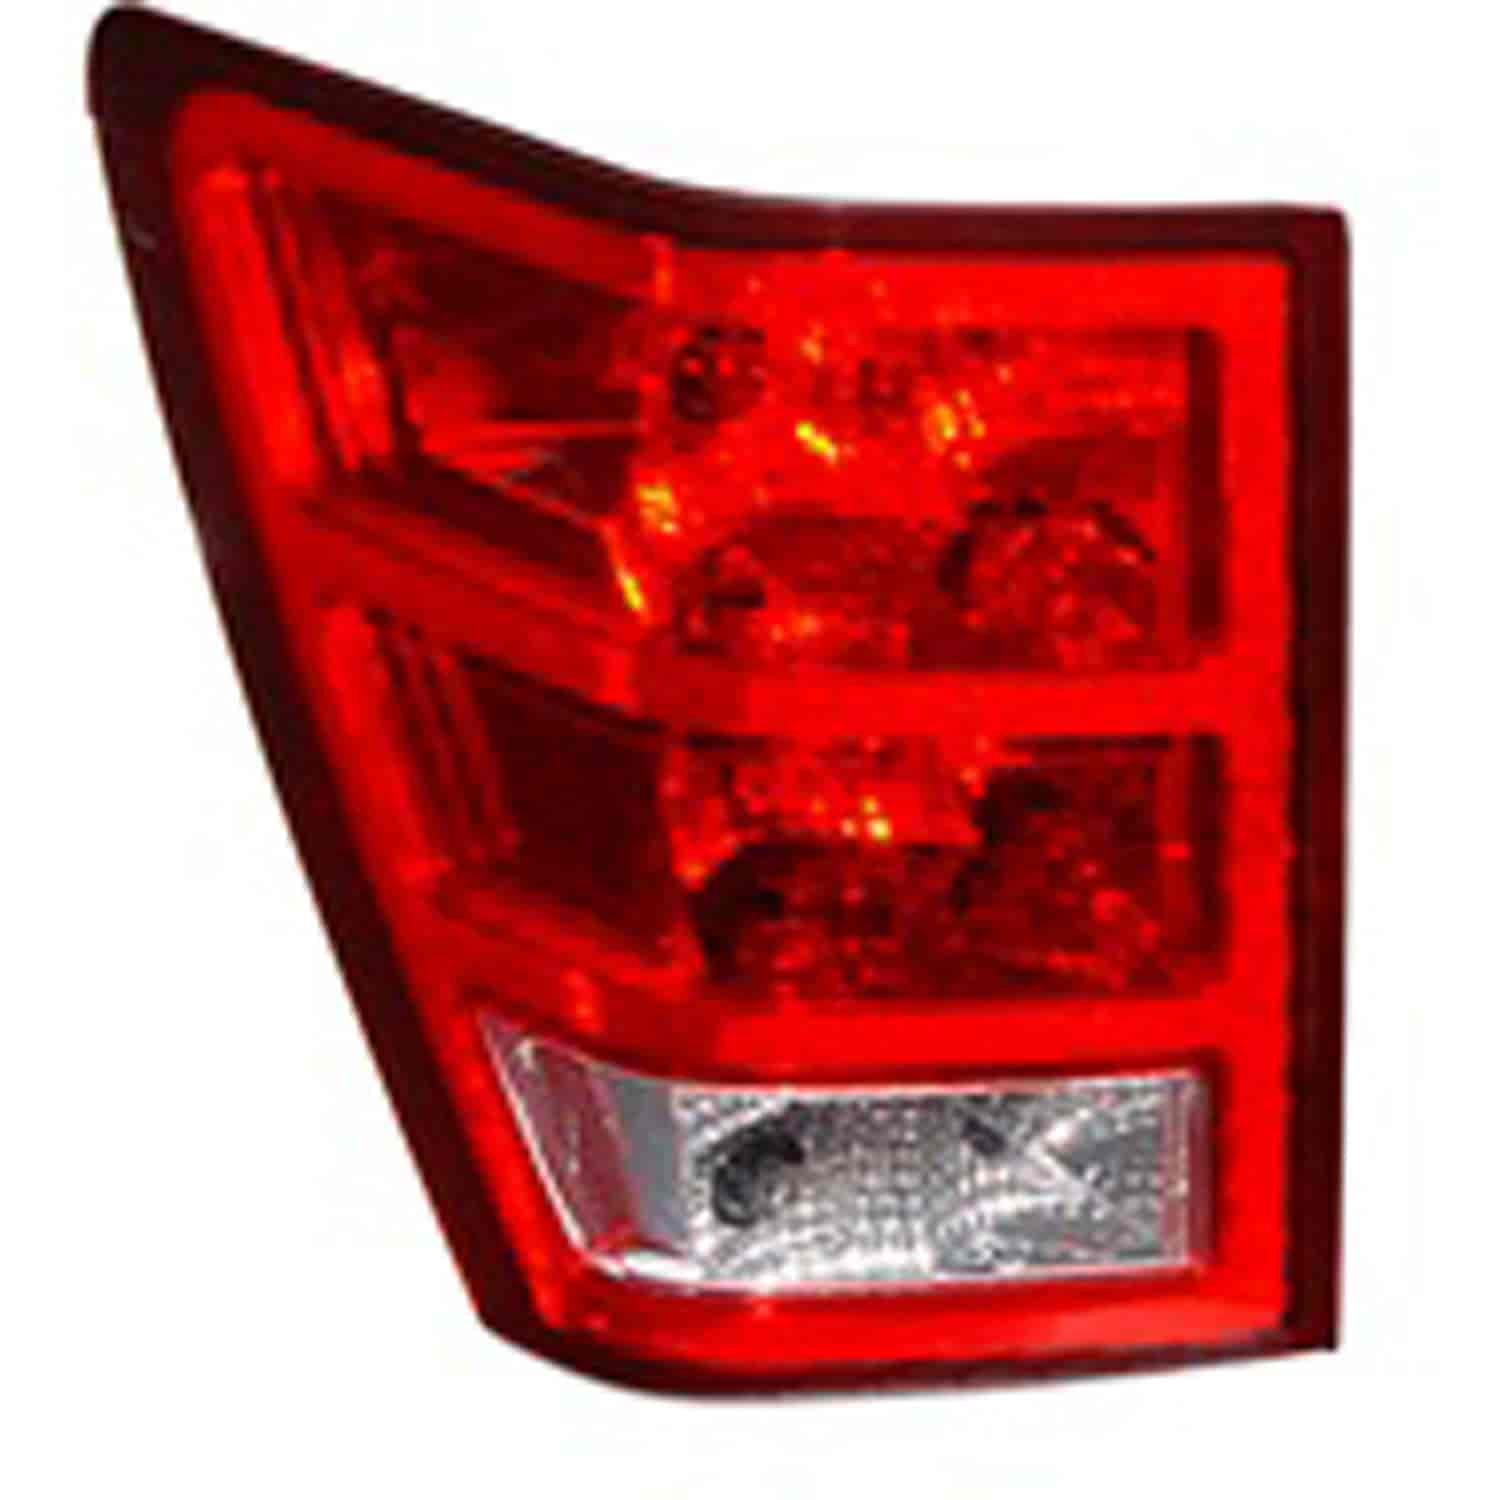 Replacement tail light assembly from Omix-ADA, Fits left